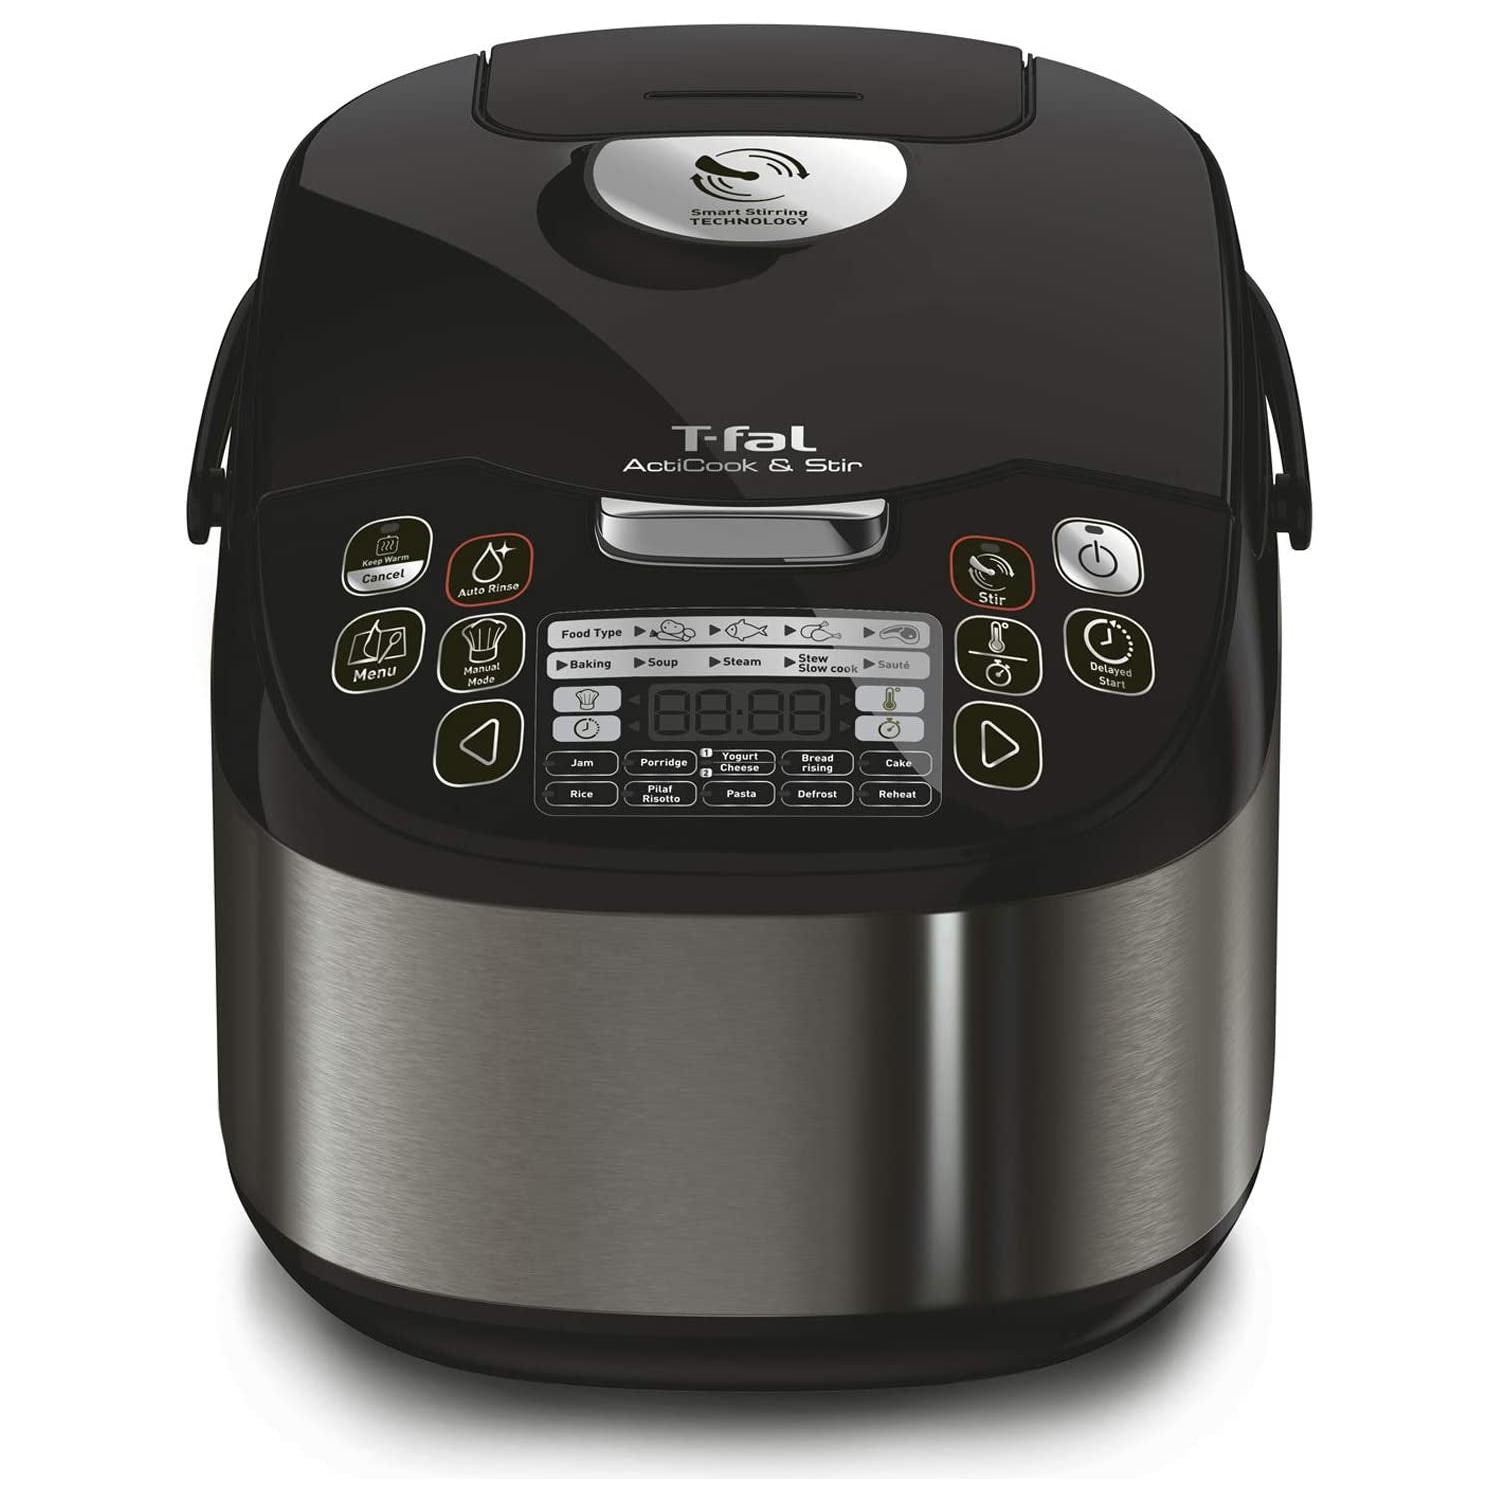 Acticook and Stir RK901B51, One-Pot Multicooker, 18 Pre-Set Cooking Programs Including Bread Rise, Deep Fryer, Slow Cooker, Rice Cooker, Intelligent Stirring Paddle, Black